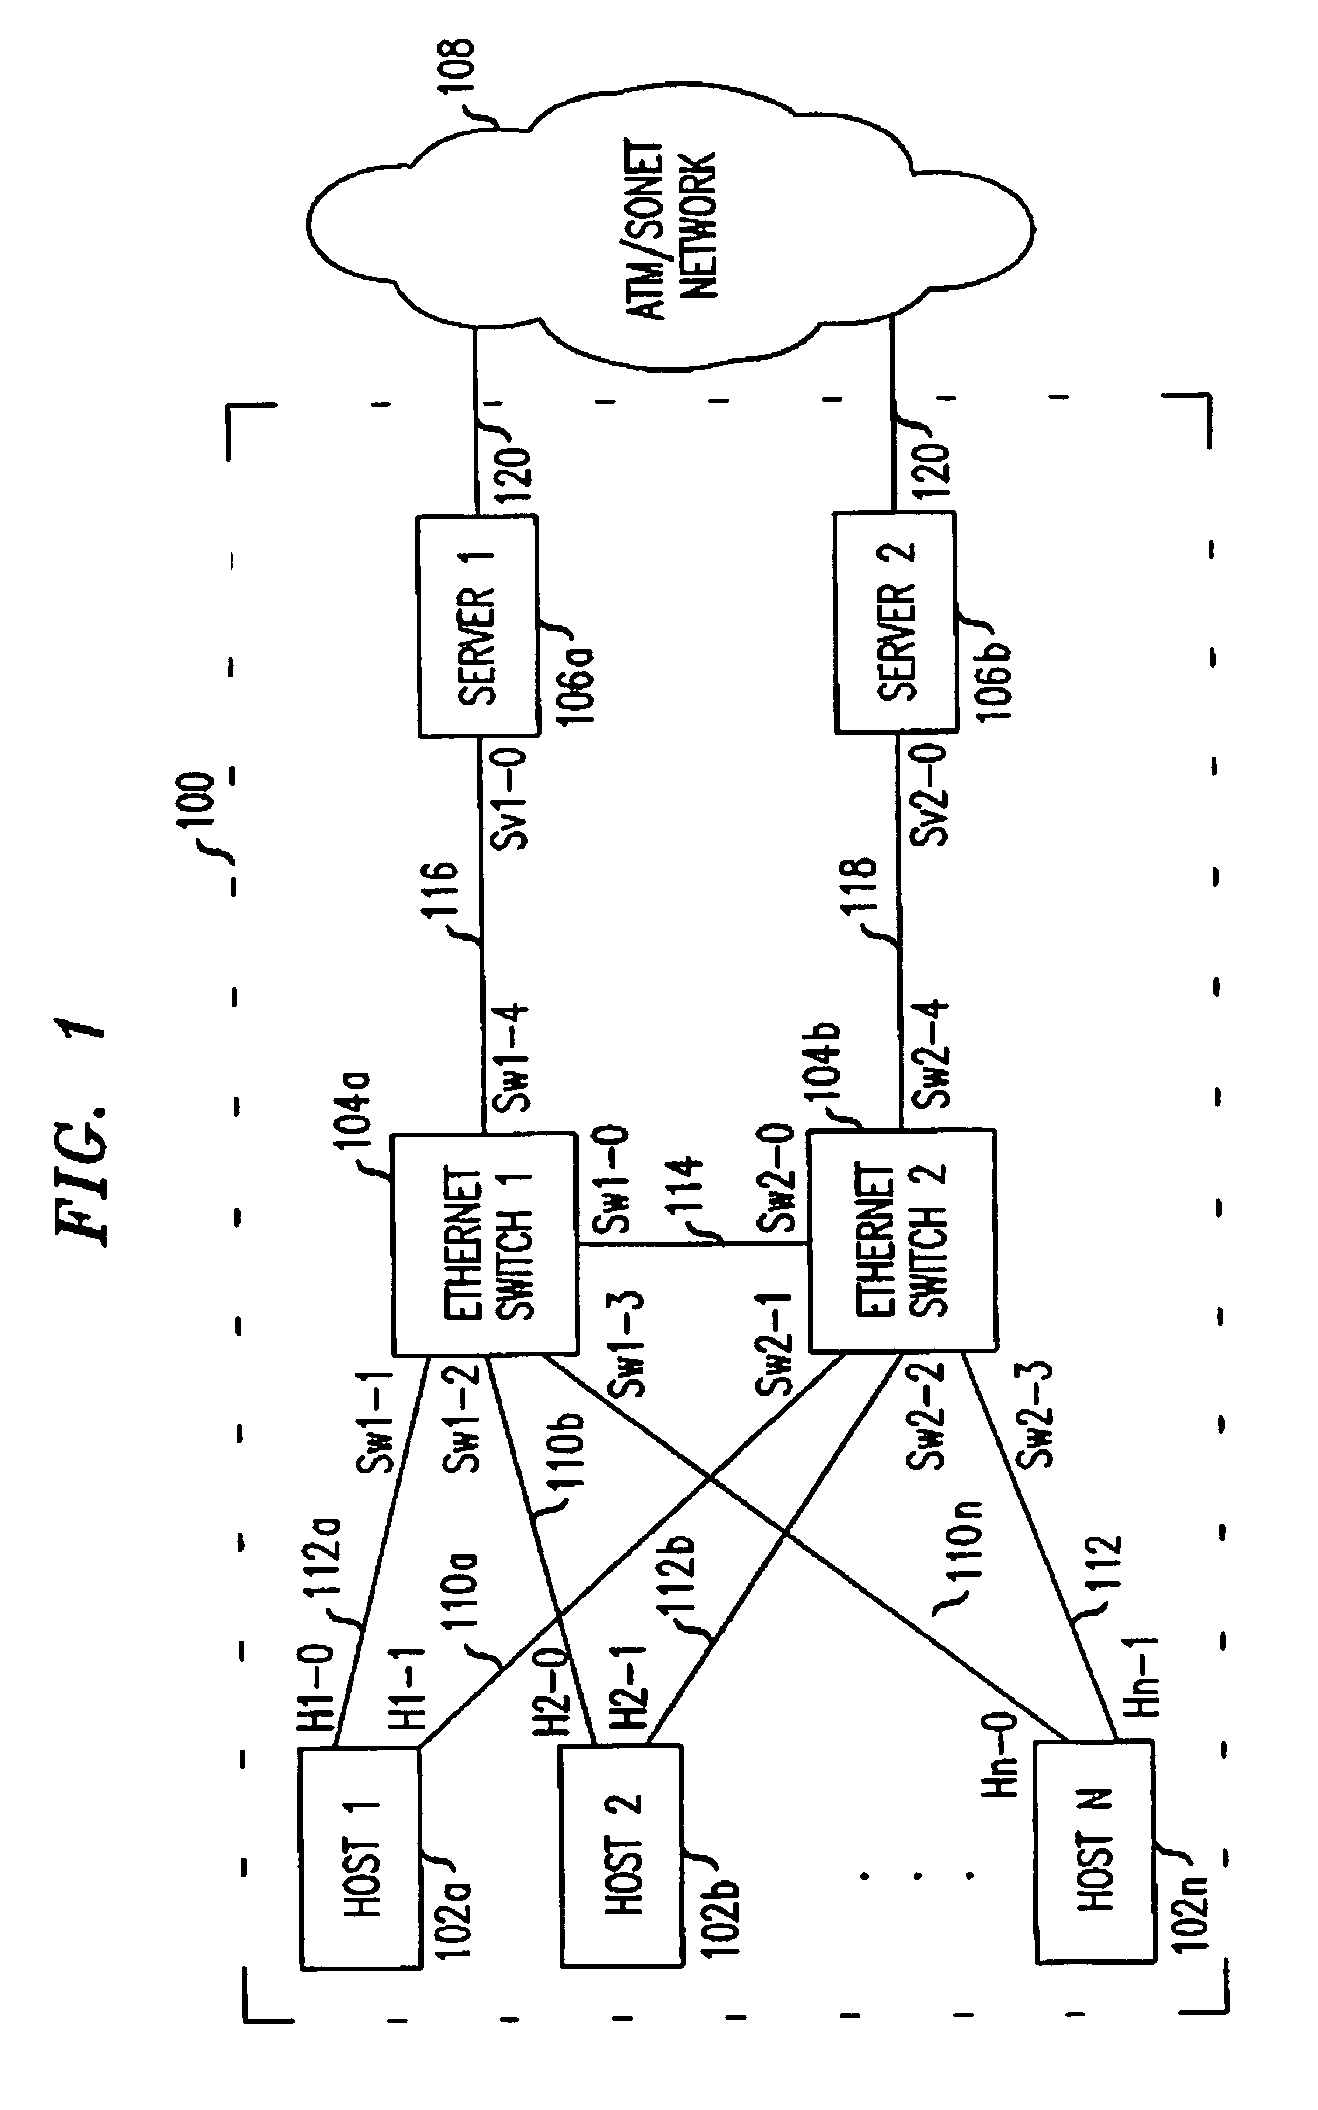 Methods for providing a reliable server architecture using a multicast topology in a communications network